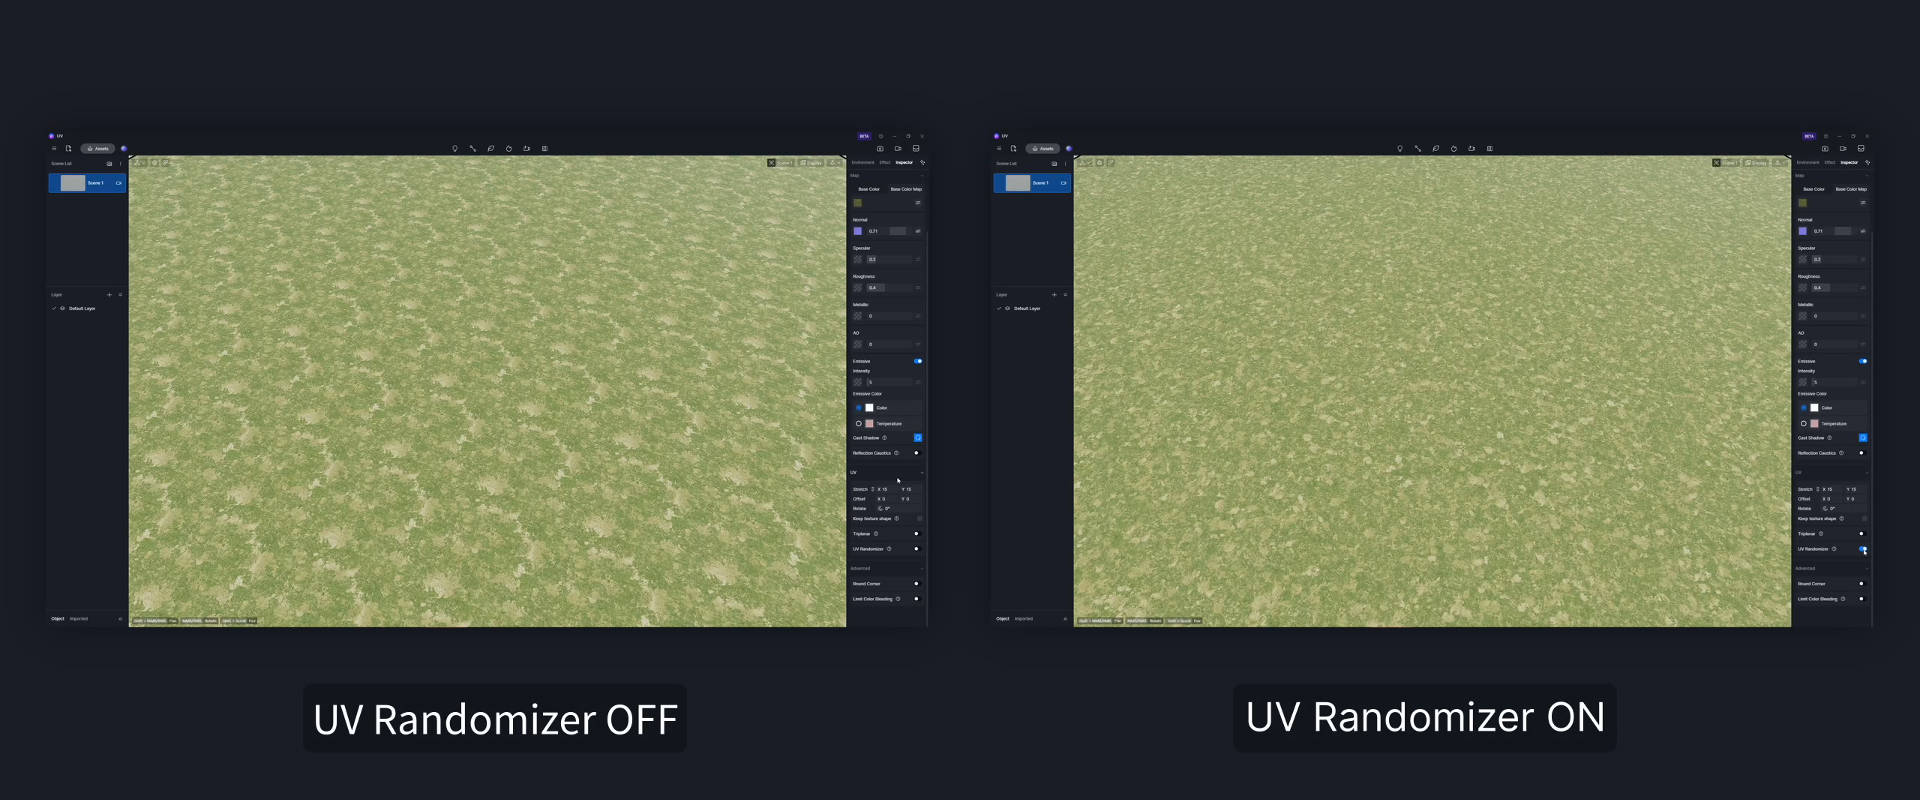 UV Randomizer: Added UV Randomizer in “Inspector” > “UV” for rotating and blending textures to avoid repetition on the surfaces, suitable for natural surfaces such as water and grass.